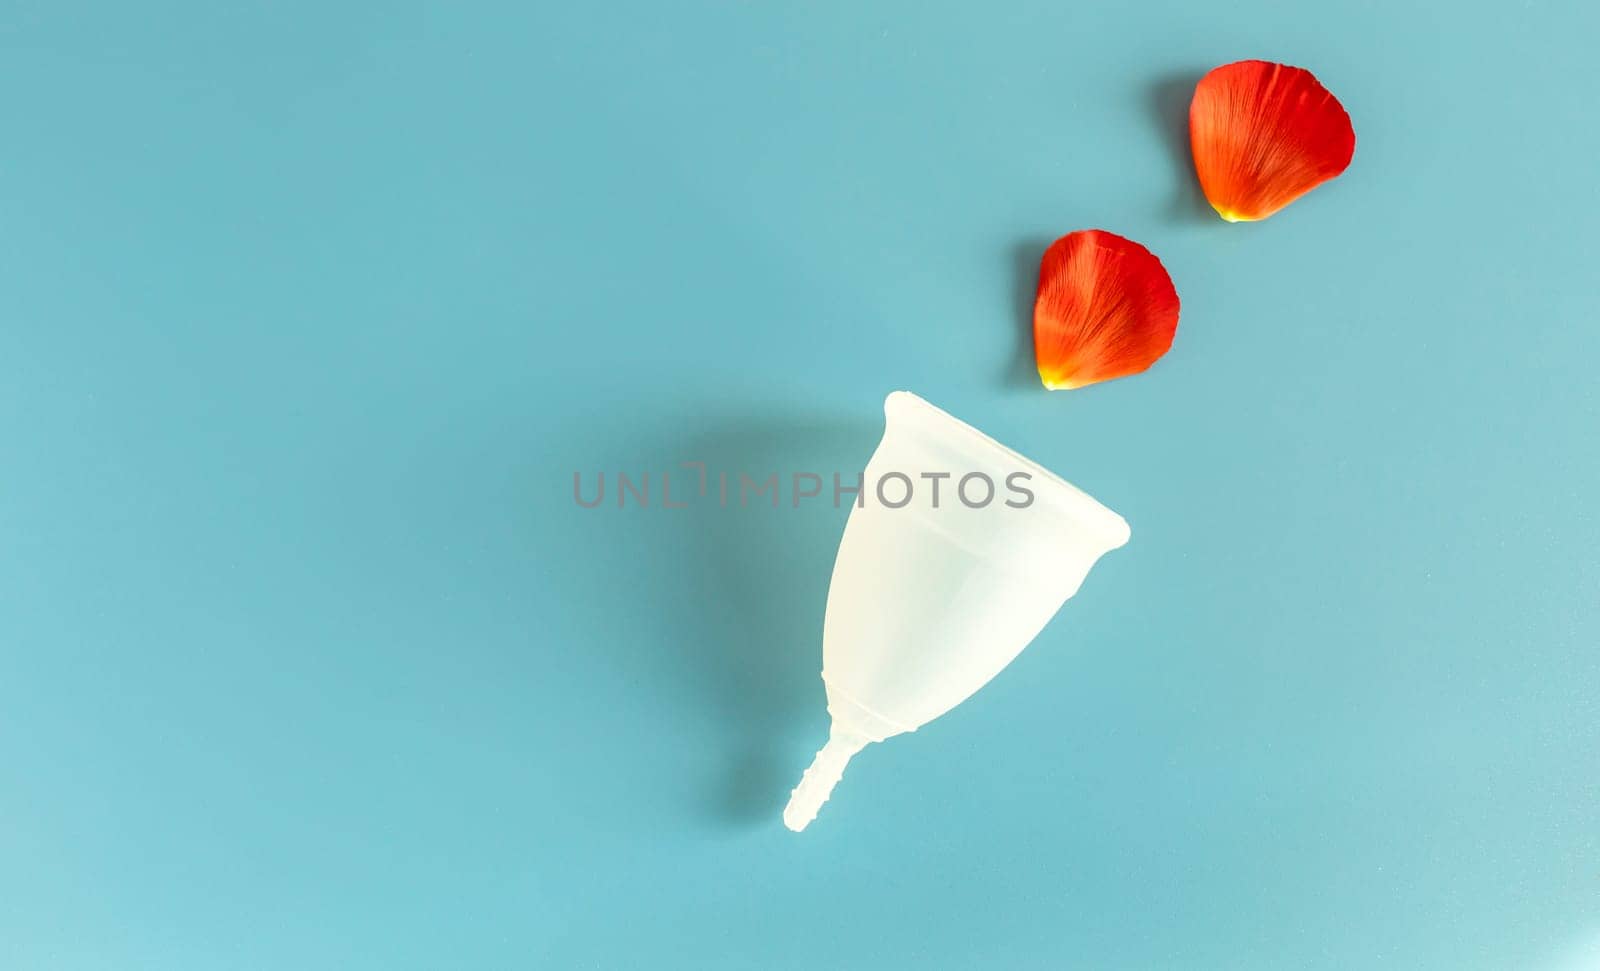 Mockup World Menstrual Hygiene Day, 28th May. Silicone Period Cup, Disk with Red Flower Petals, View From Above. Space For Text. Horizontal Design, Template. Intimate Hygiene. Menstruation Cycle.